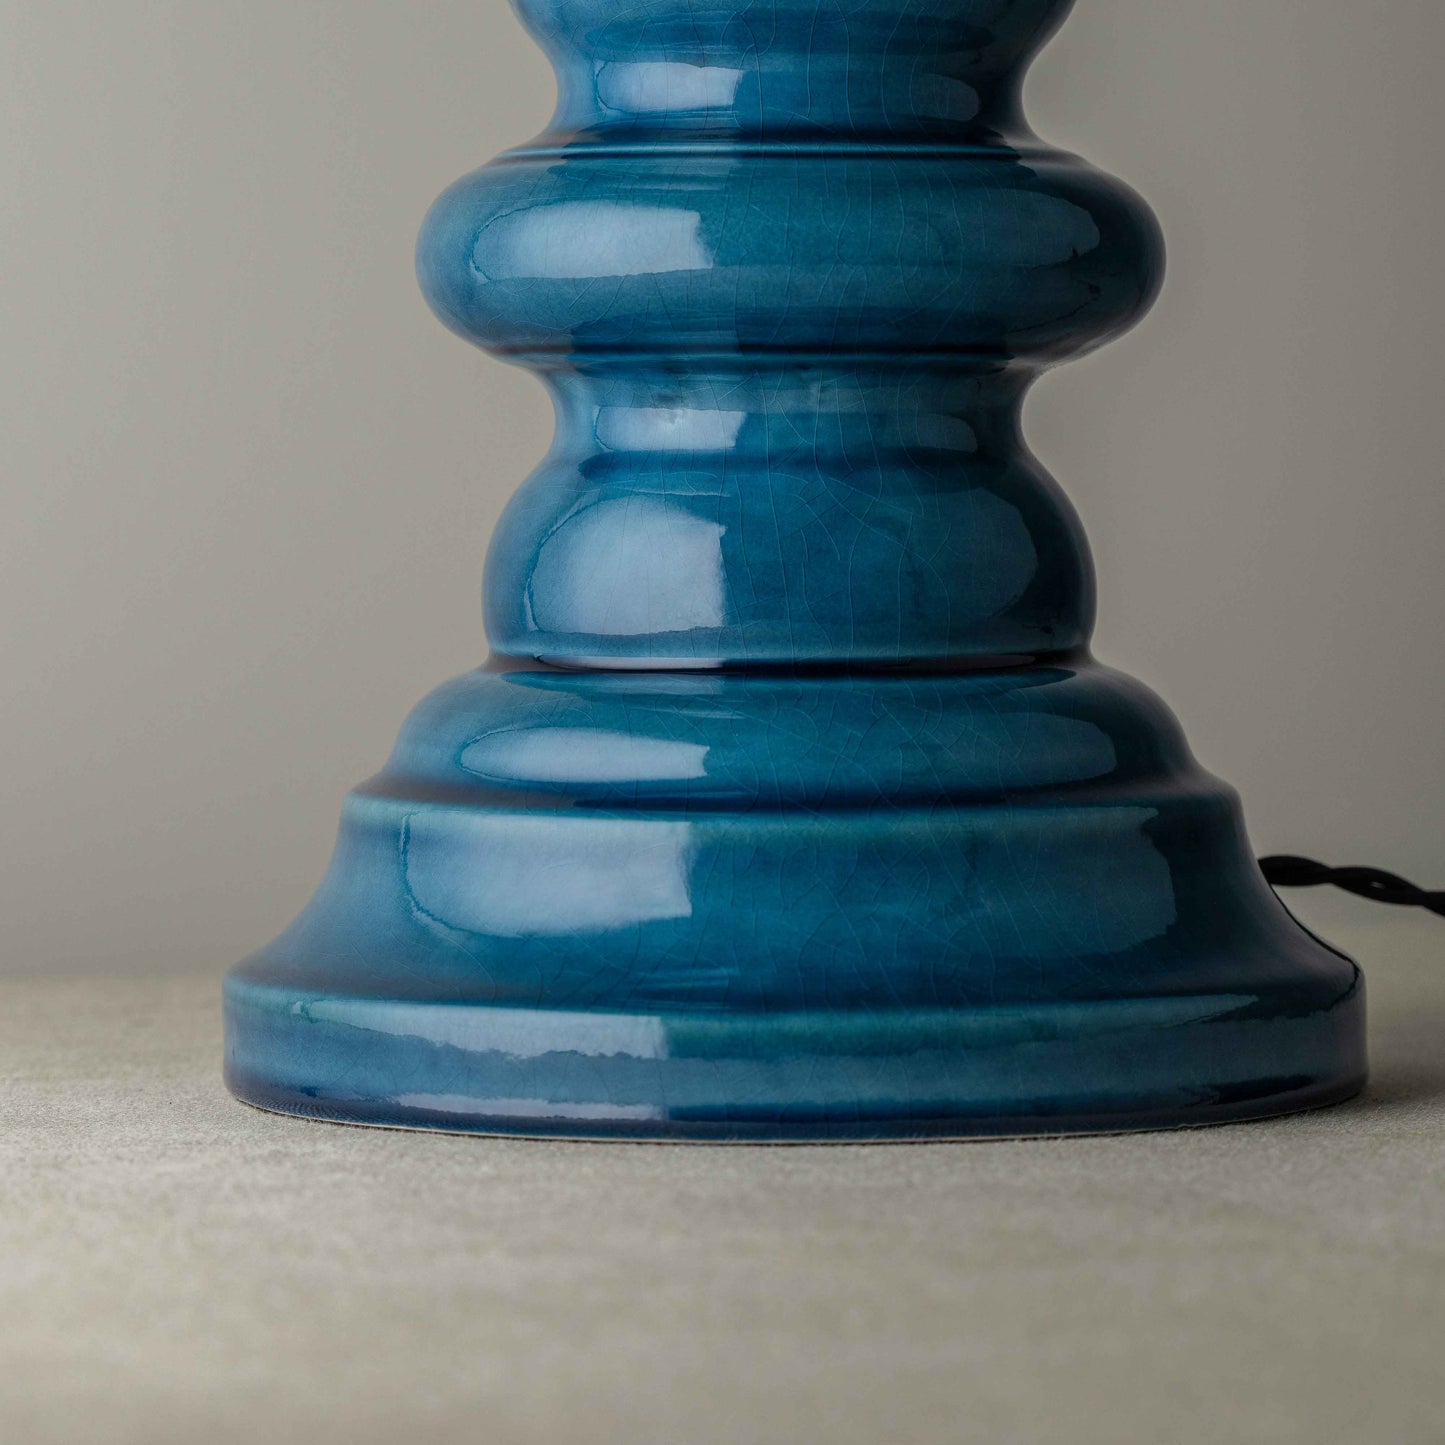 Hourglass Ceramic Table Lamp Base in Blue